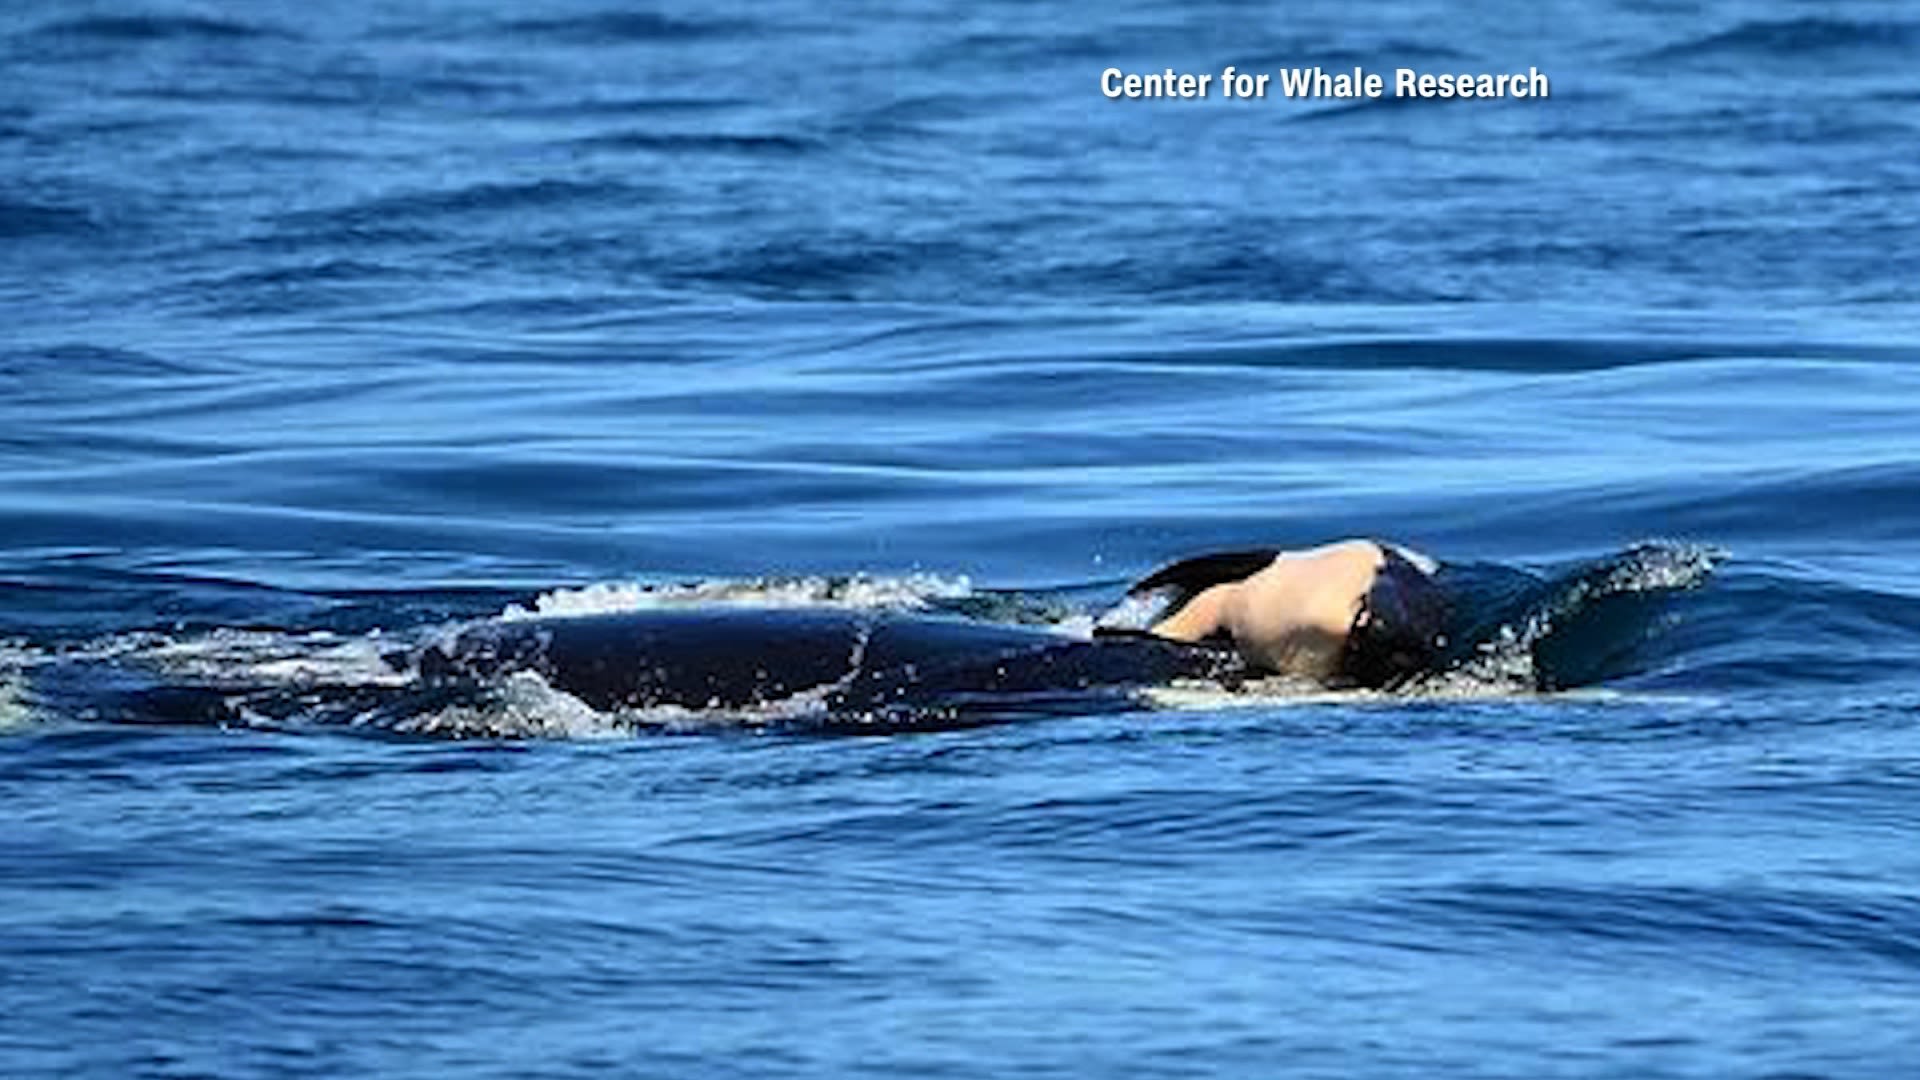 Its heartbreaking killer whale continues carrying dead calf for unprecedented length of mourning